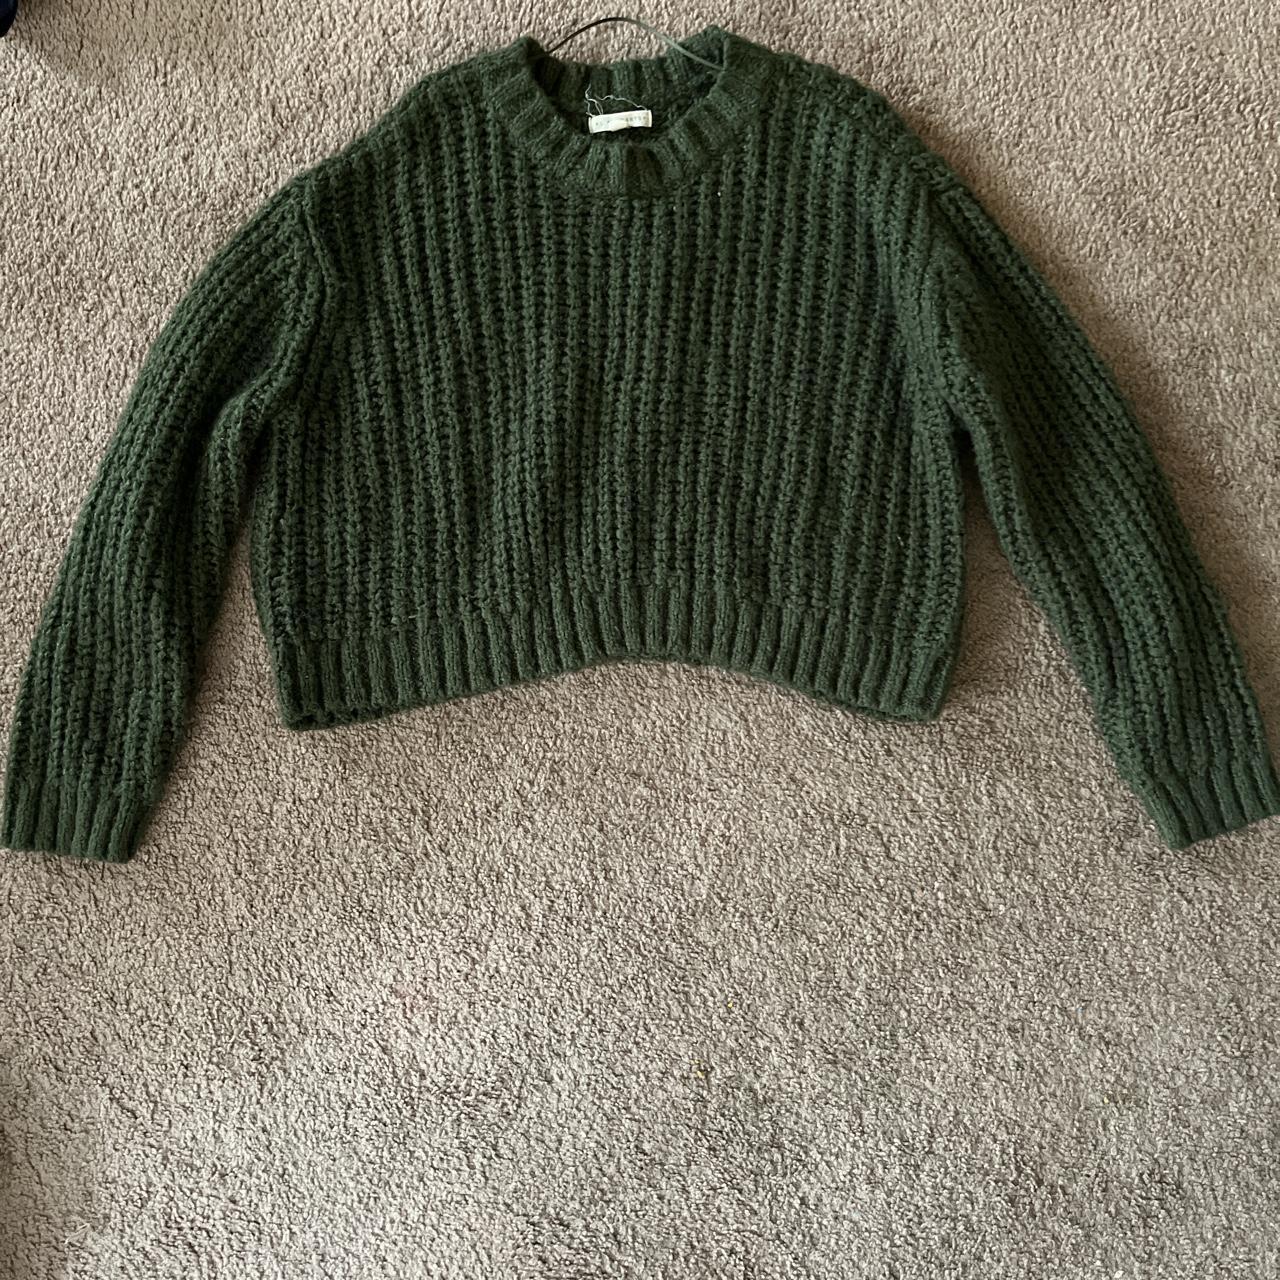 Pacsun cropped green sweater Womens small #pacsun... - Depop